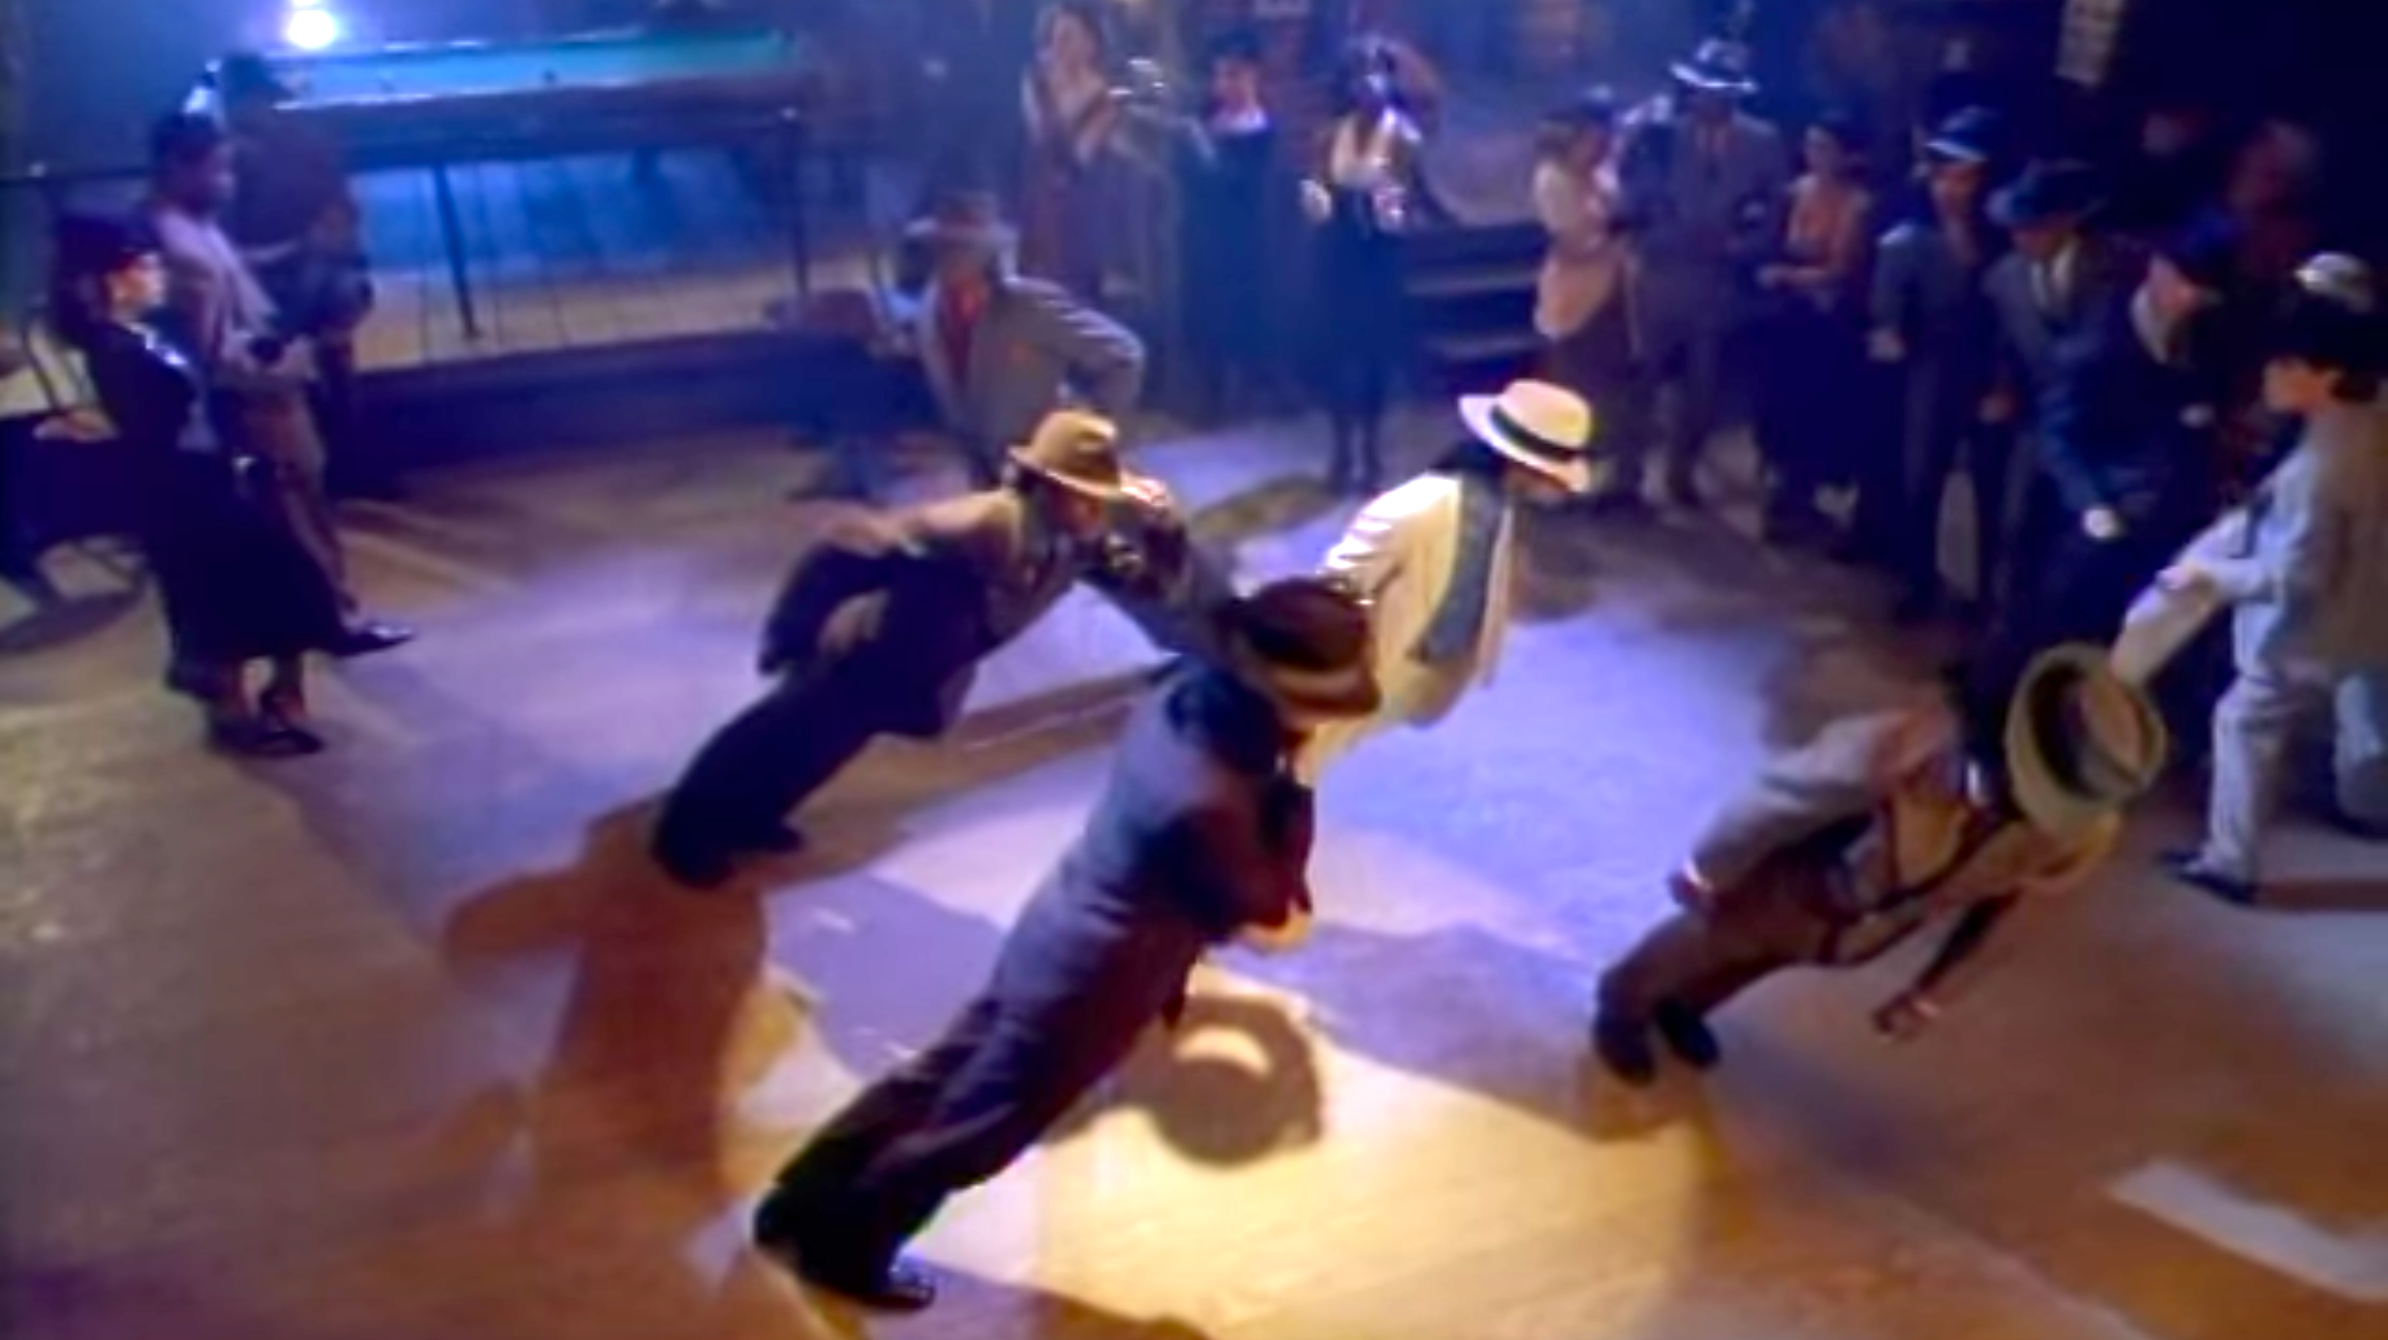 How To Dance Like Michael Jackson: Nail Your Shoes To The Floor